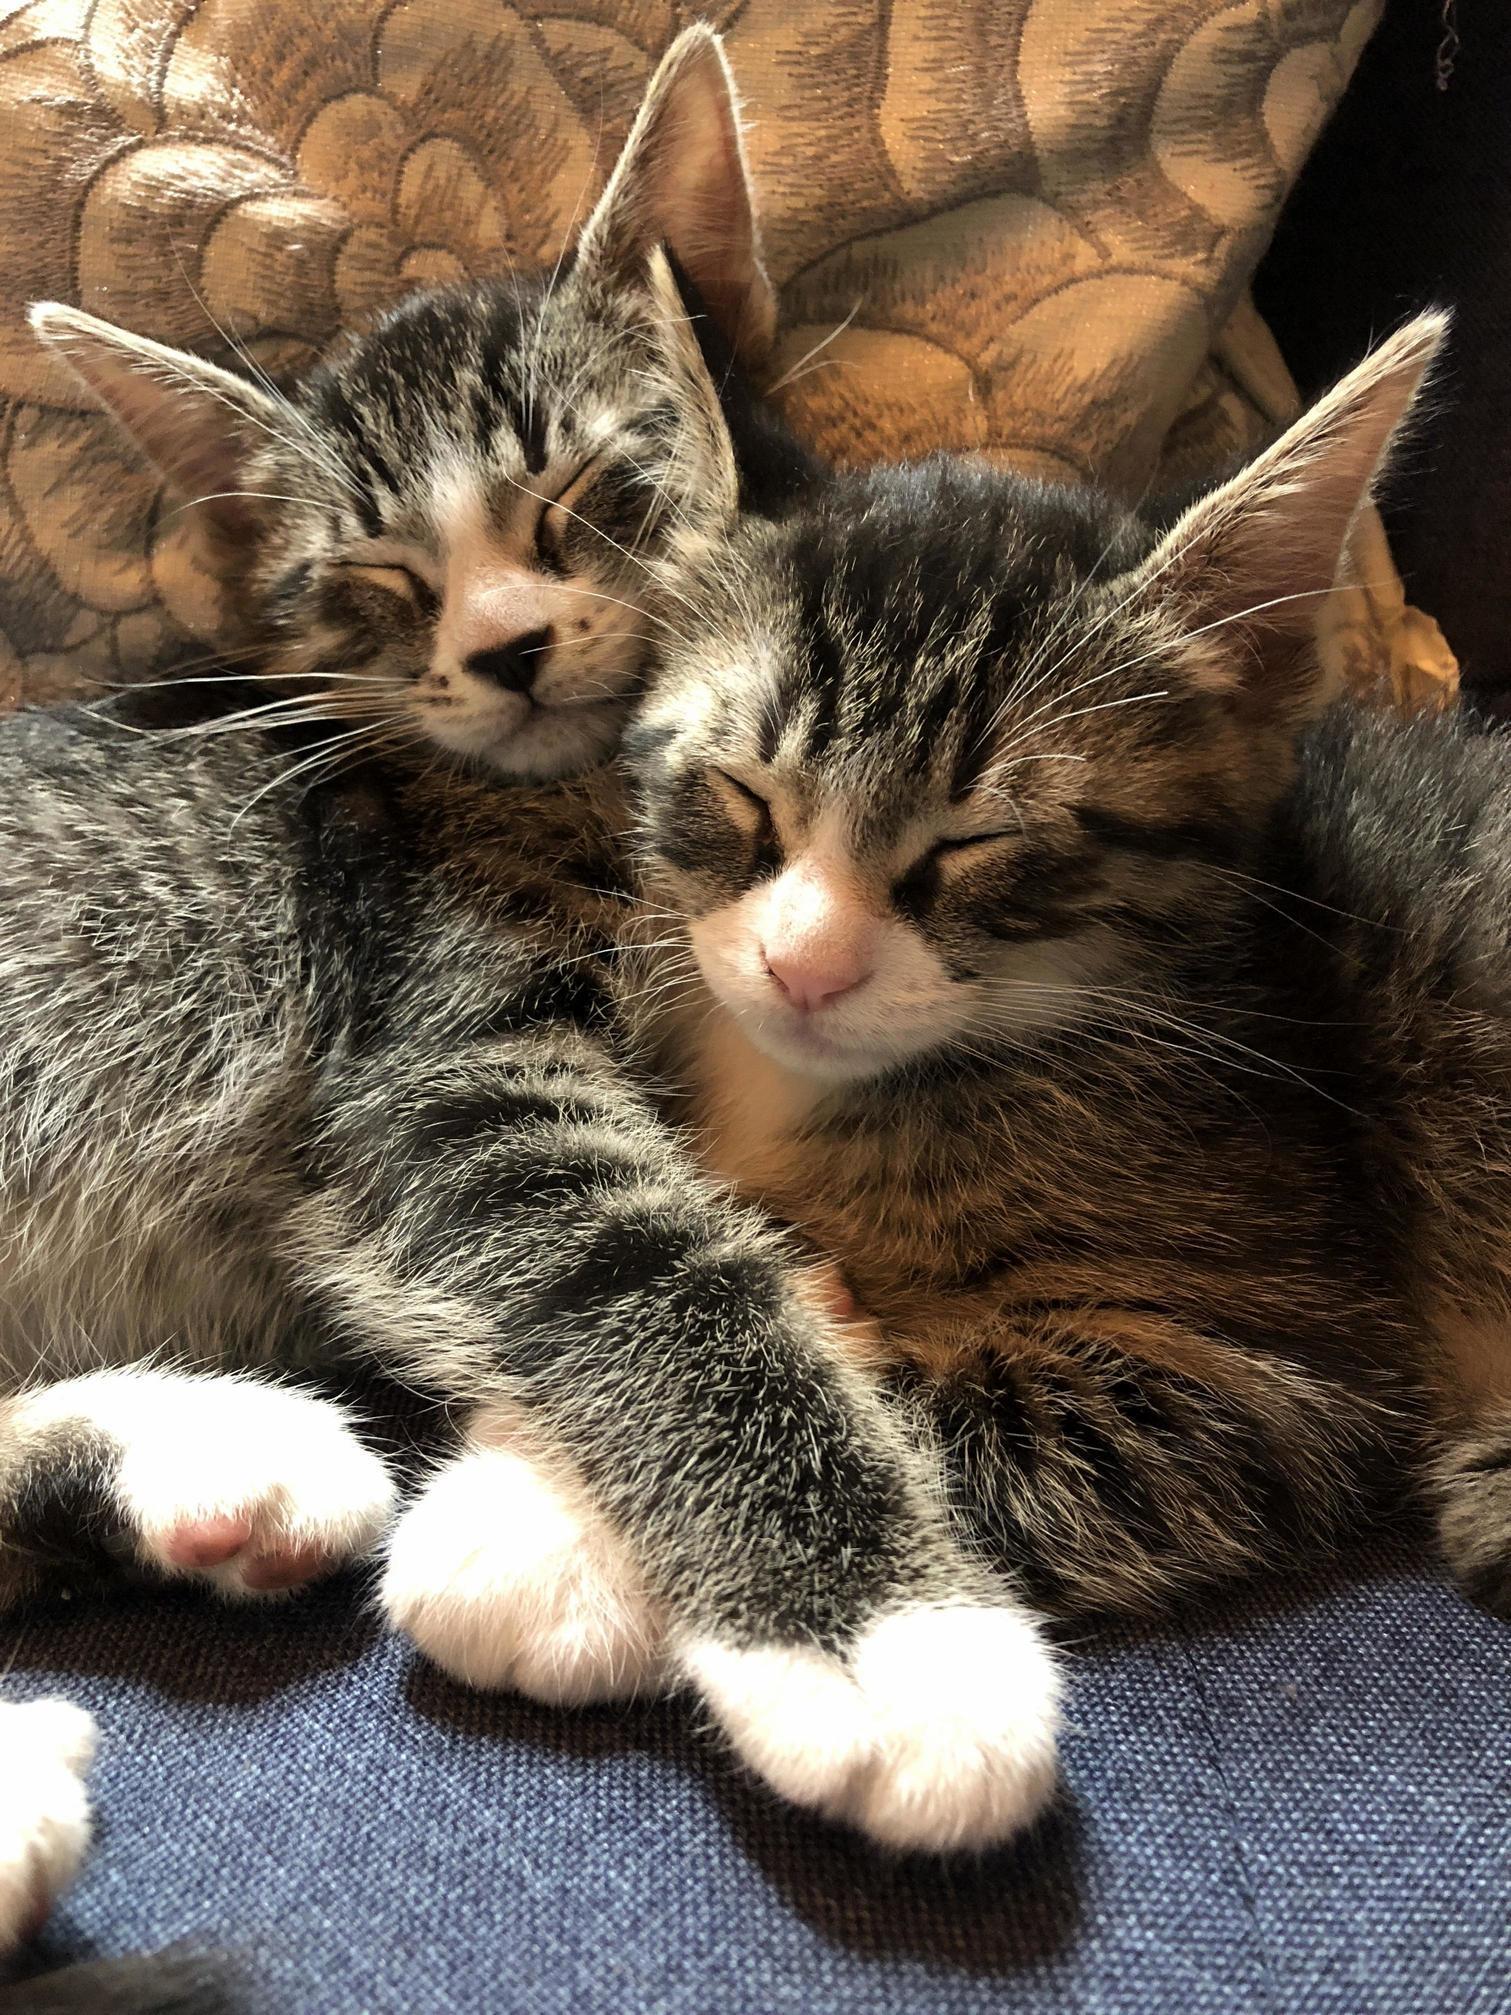 Ive found the bonded pair in my group of fosters captain holt and sarge